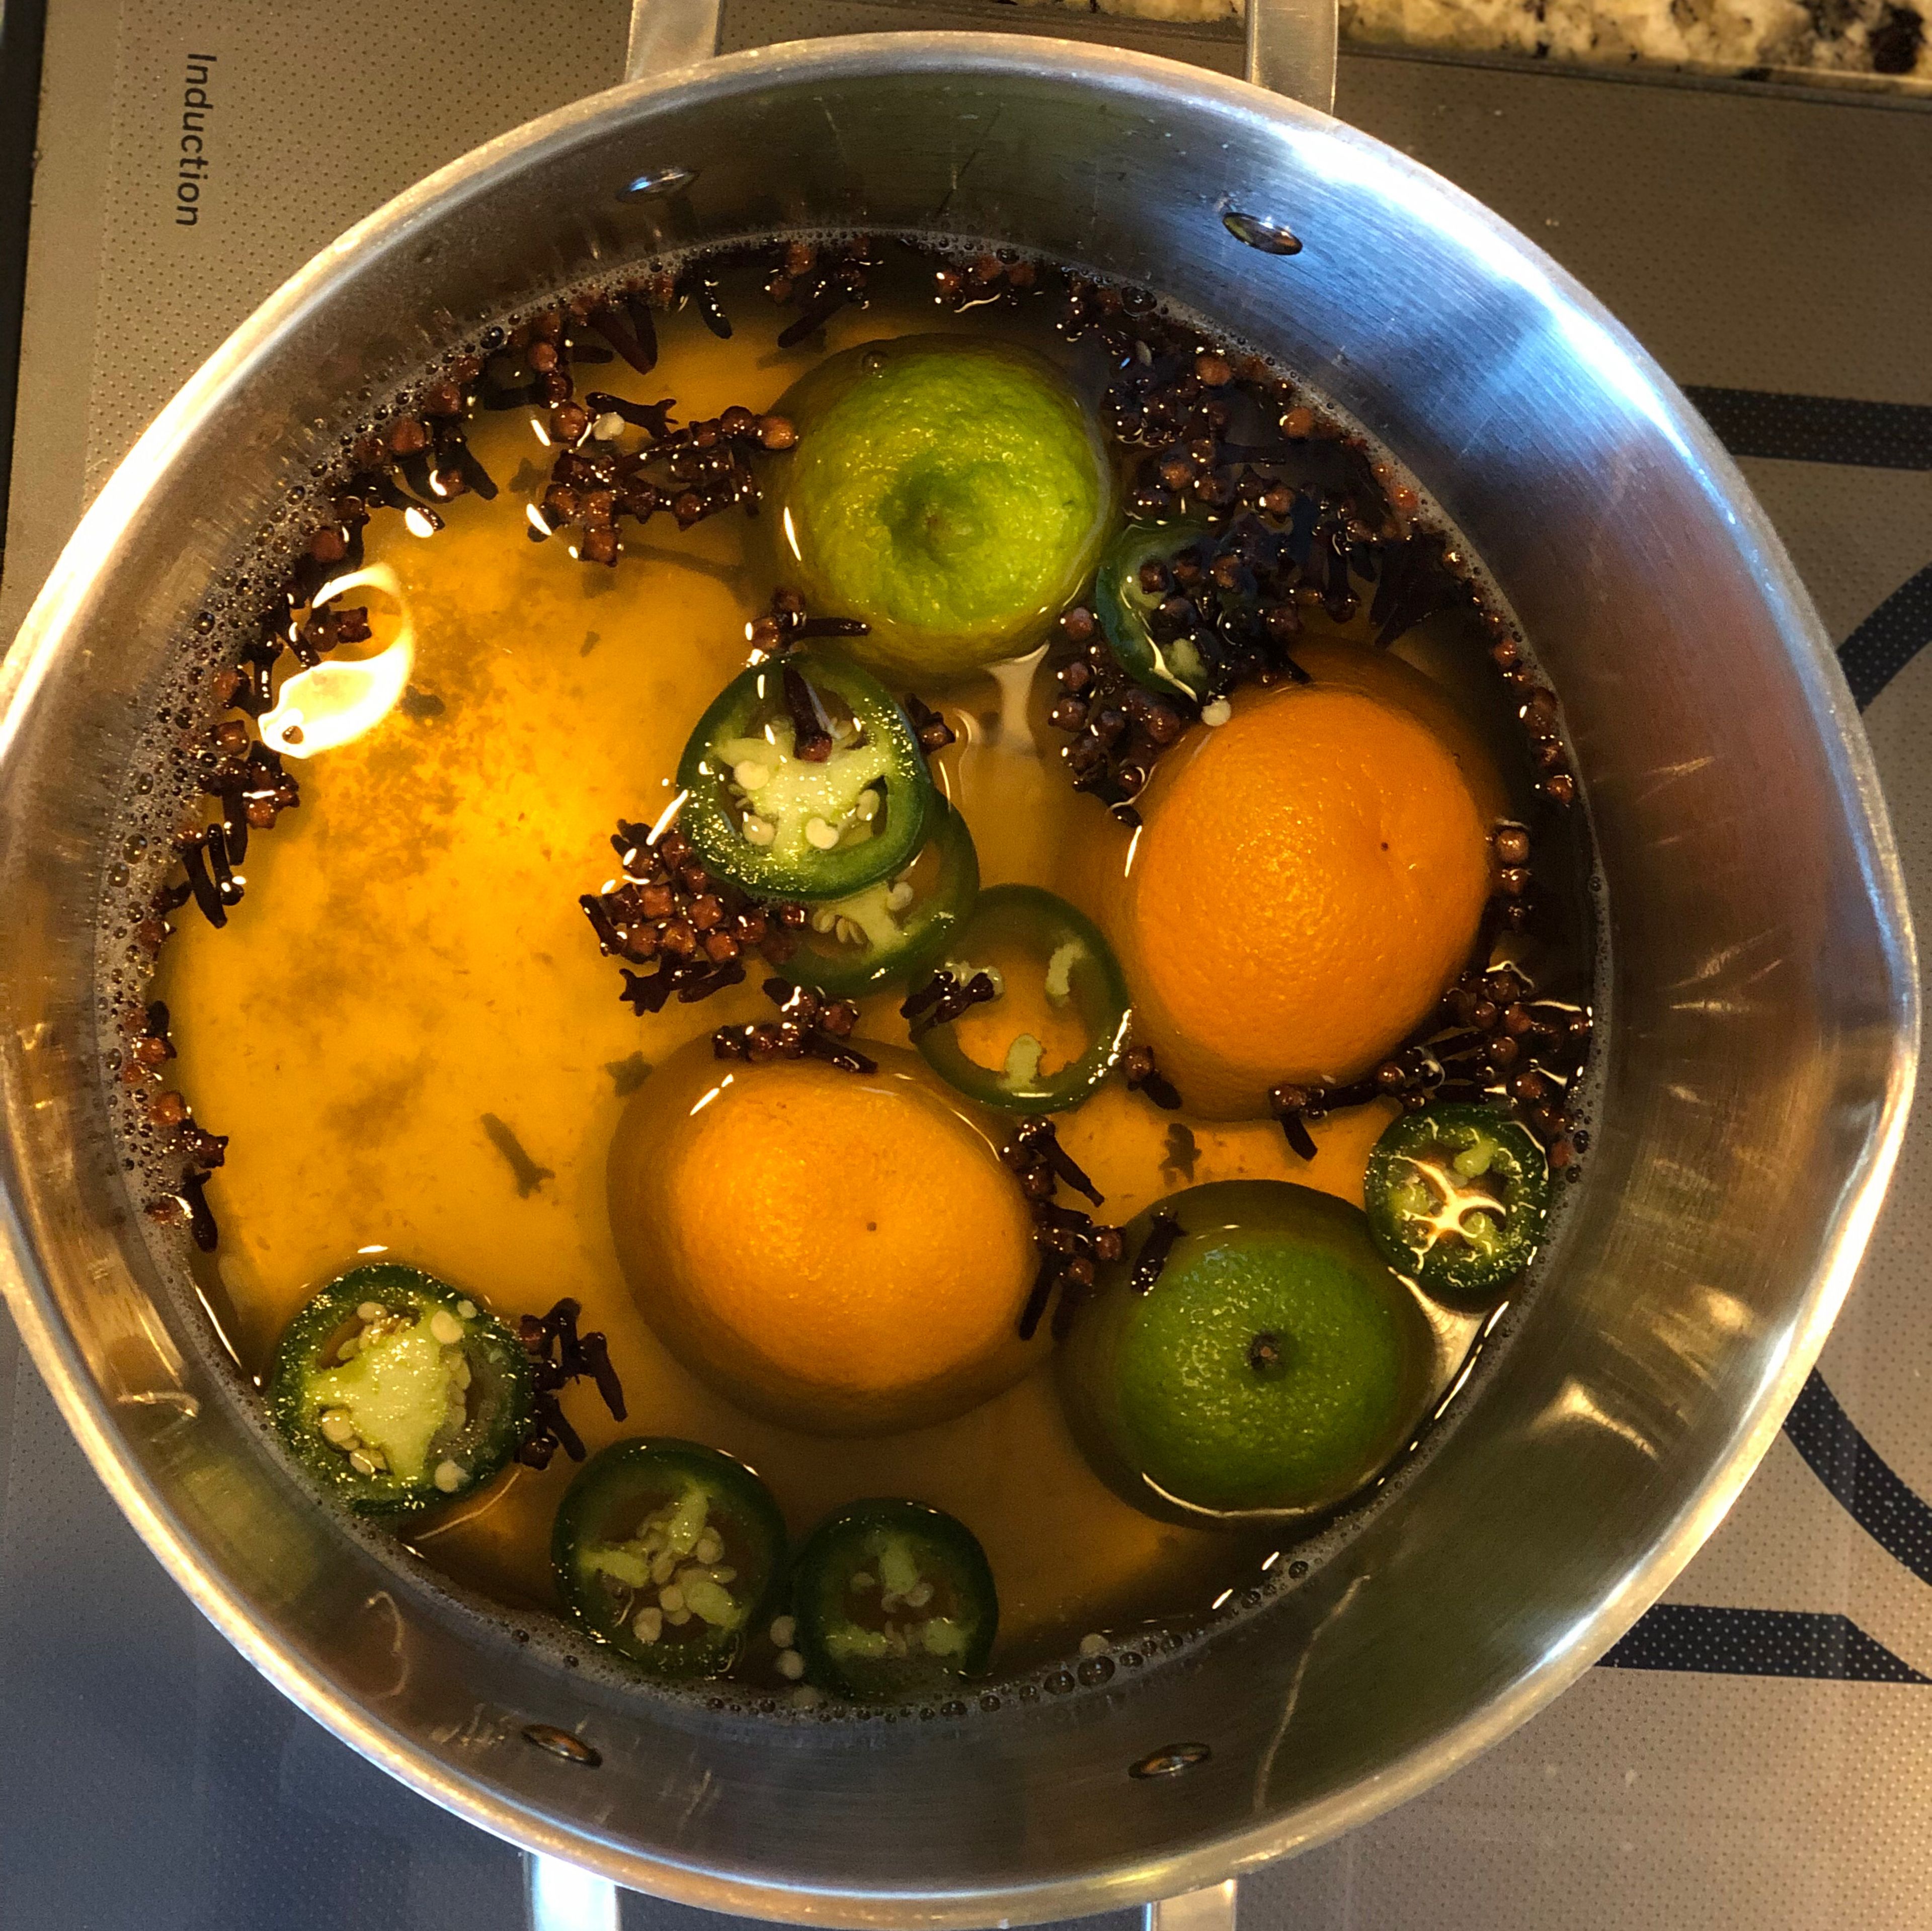 Add the jalapeños, cloves and star anise to the brining base.